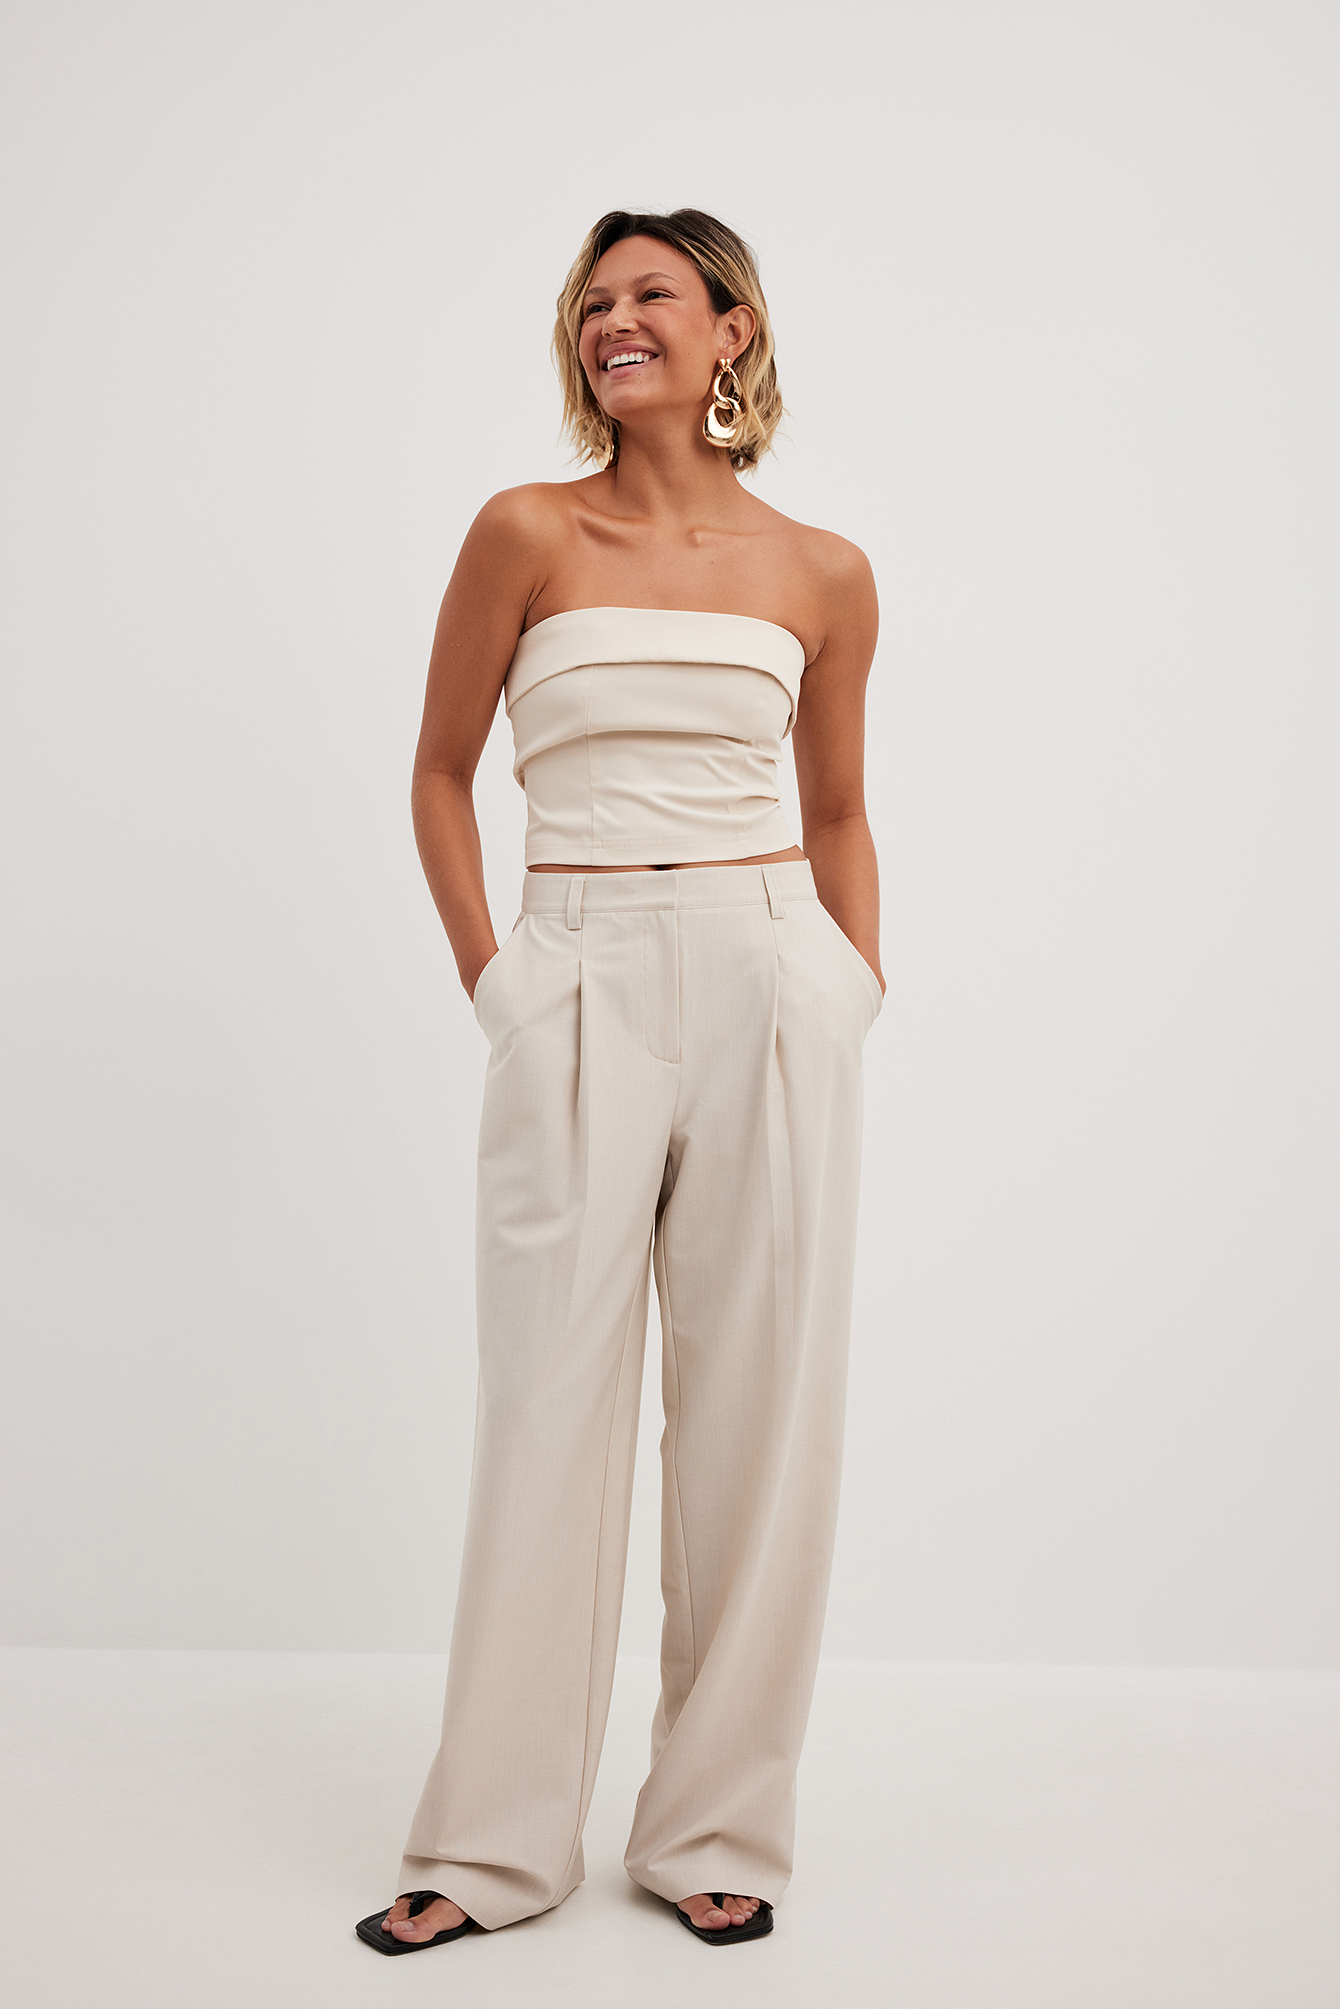 Pants Suit Melange NA-KD Offwhite | Pleated Rise High